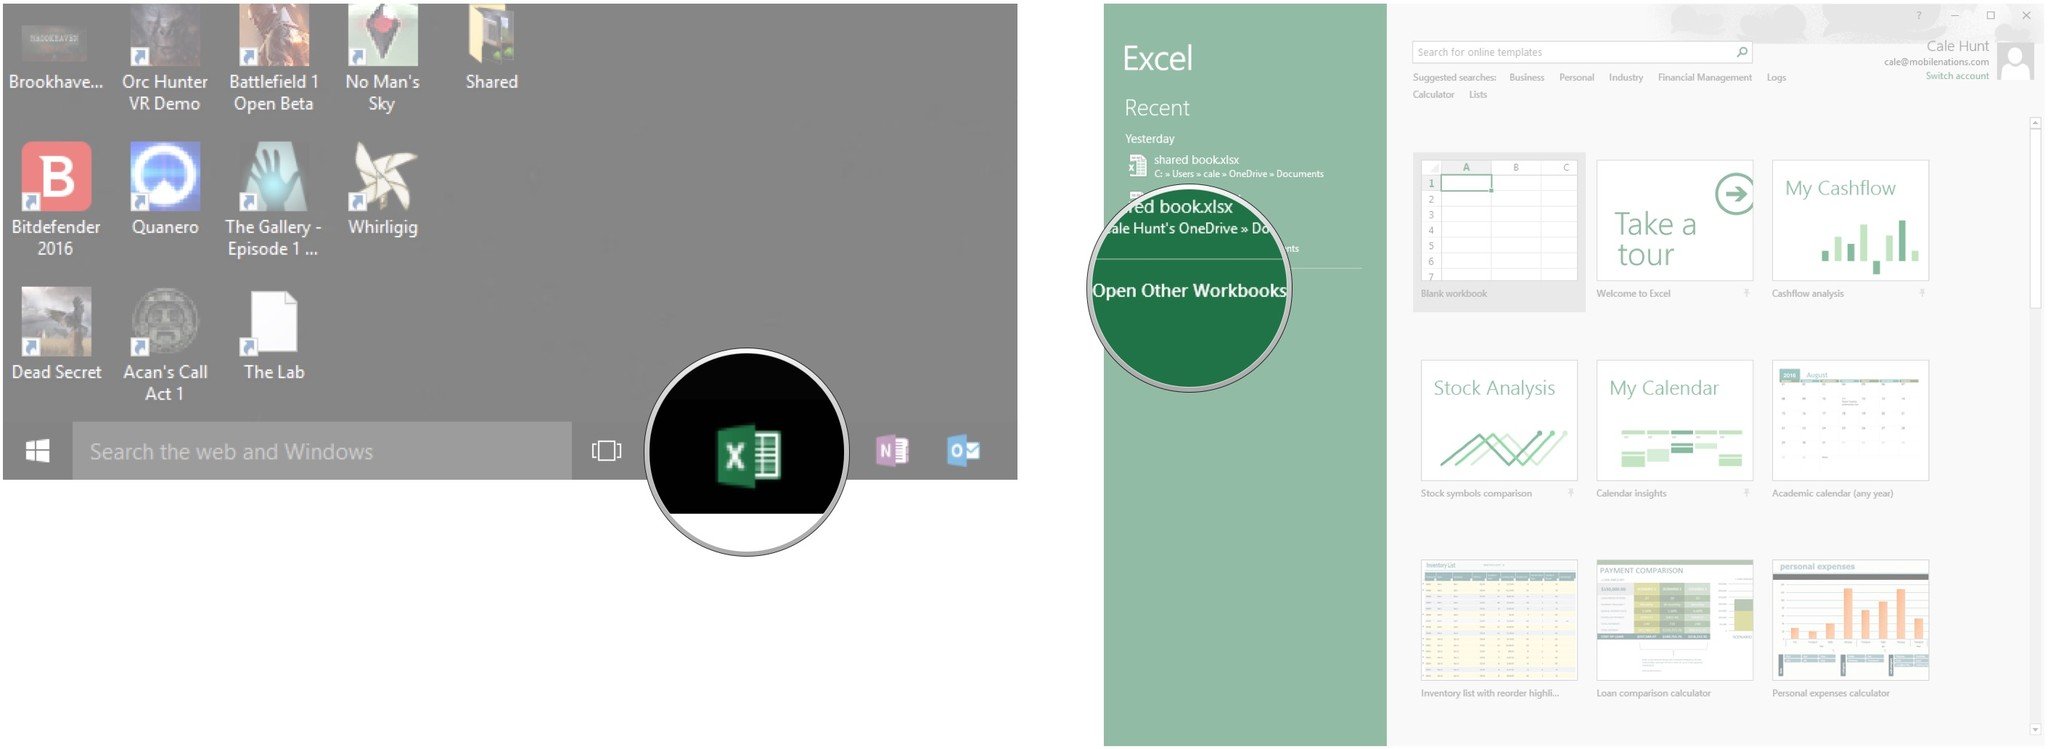 Launch Excel. Click Open Other Workbooks.